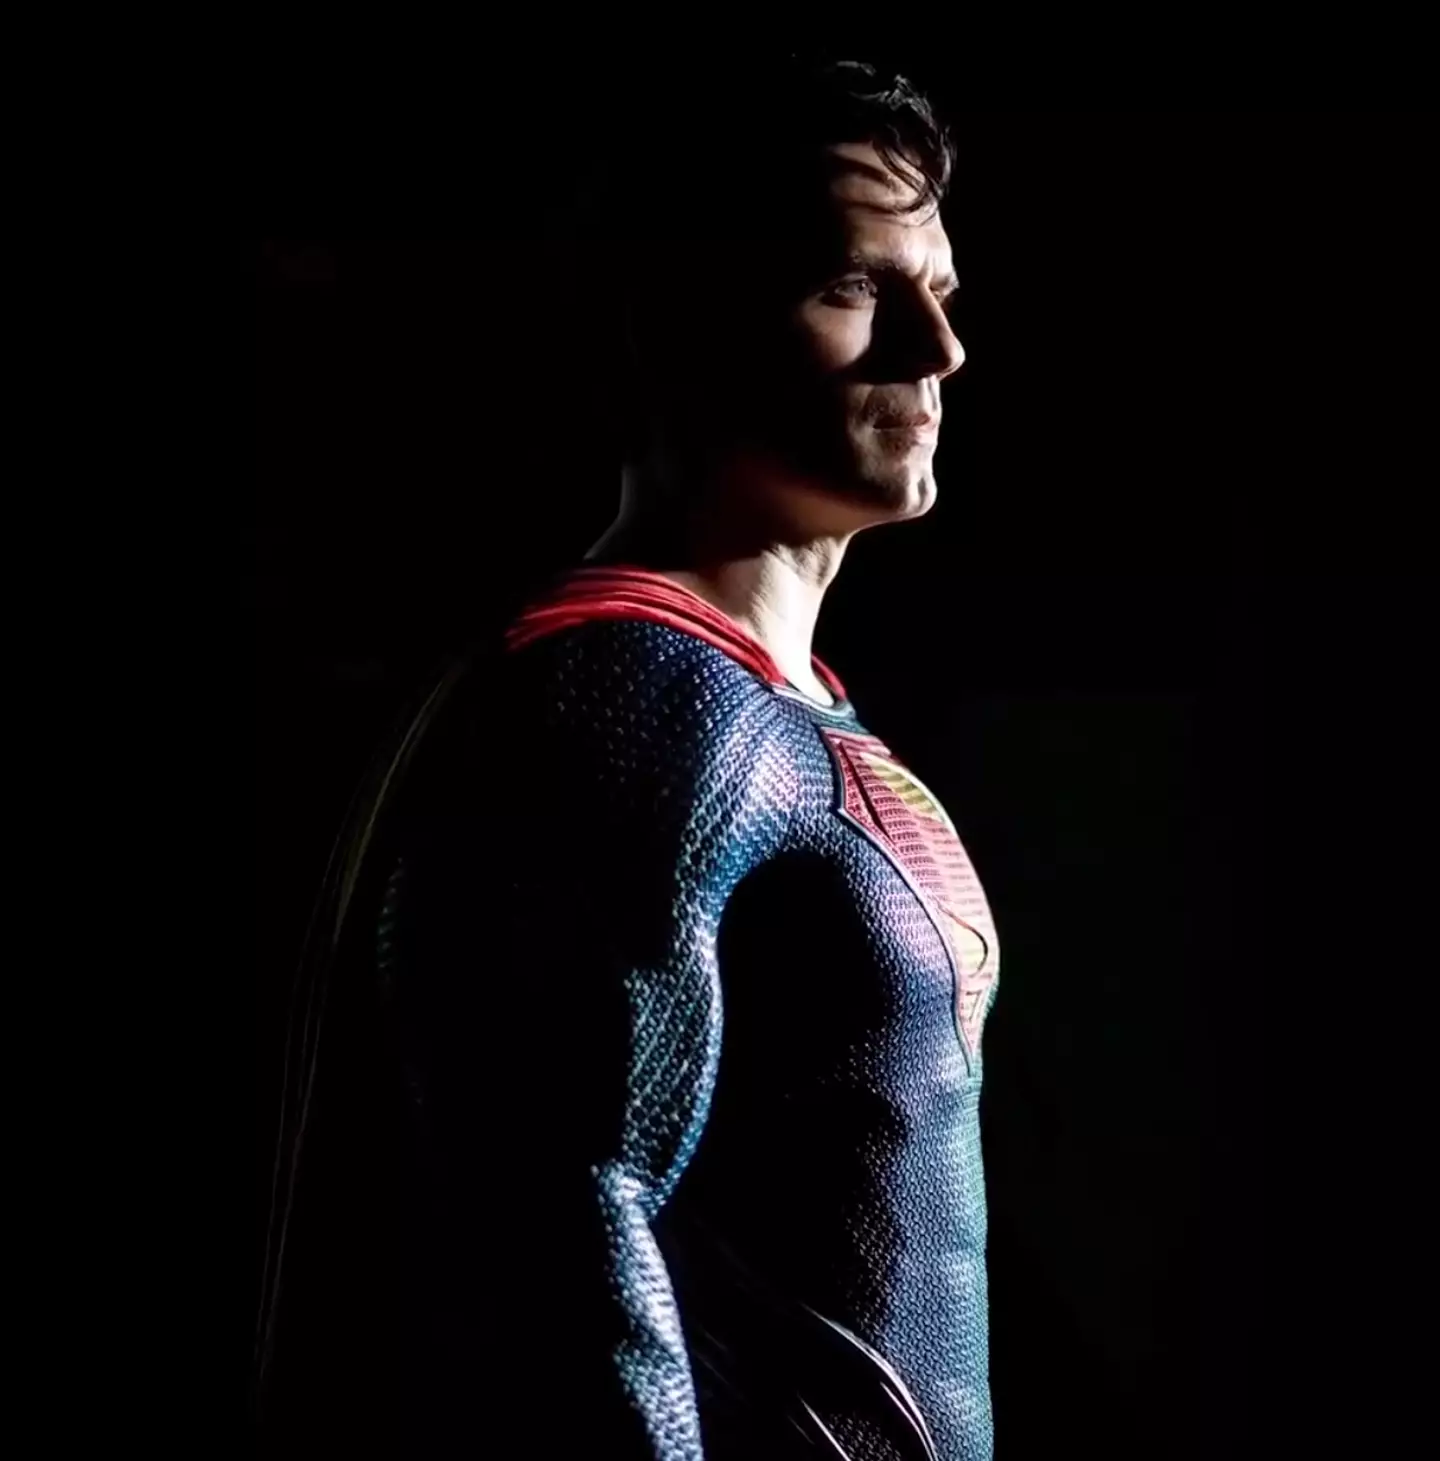 Cavill recently announced his return as Superman.